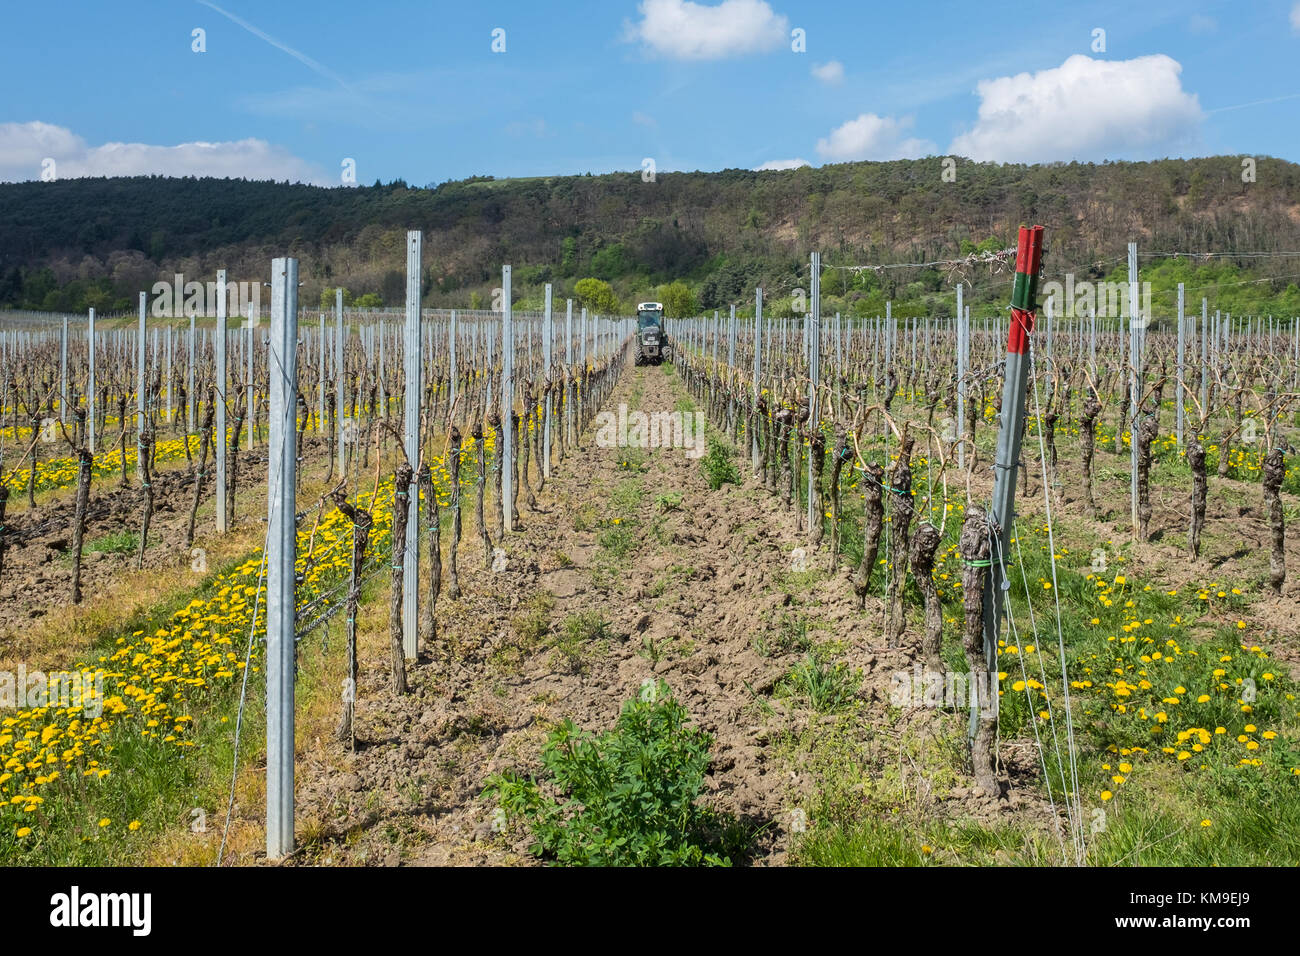 Tractor driving through vines in a vineyard, Germany Stock Photo